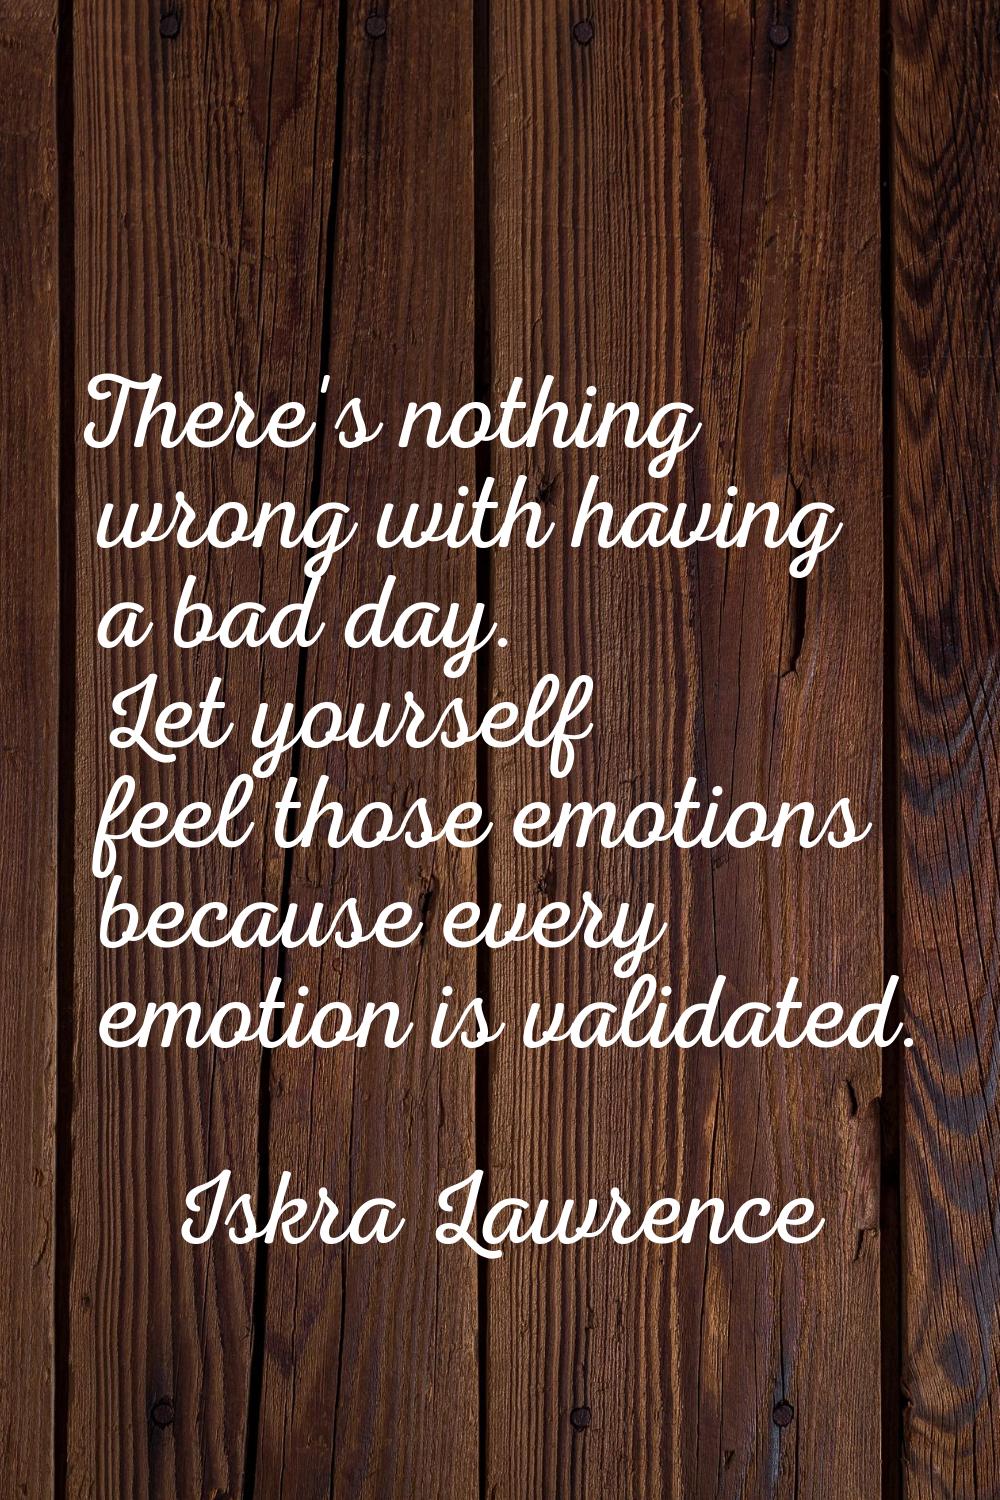 There's nothing wrong with having a bad day. Let yourself feel those emotions because every emotion